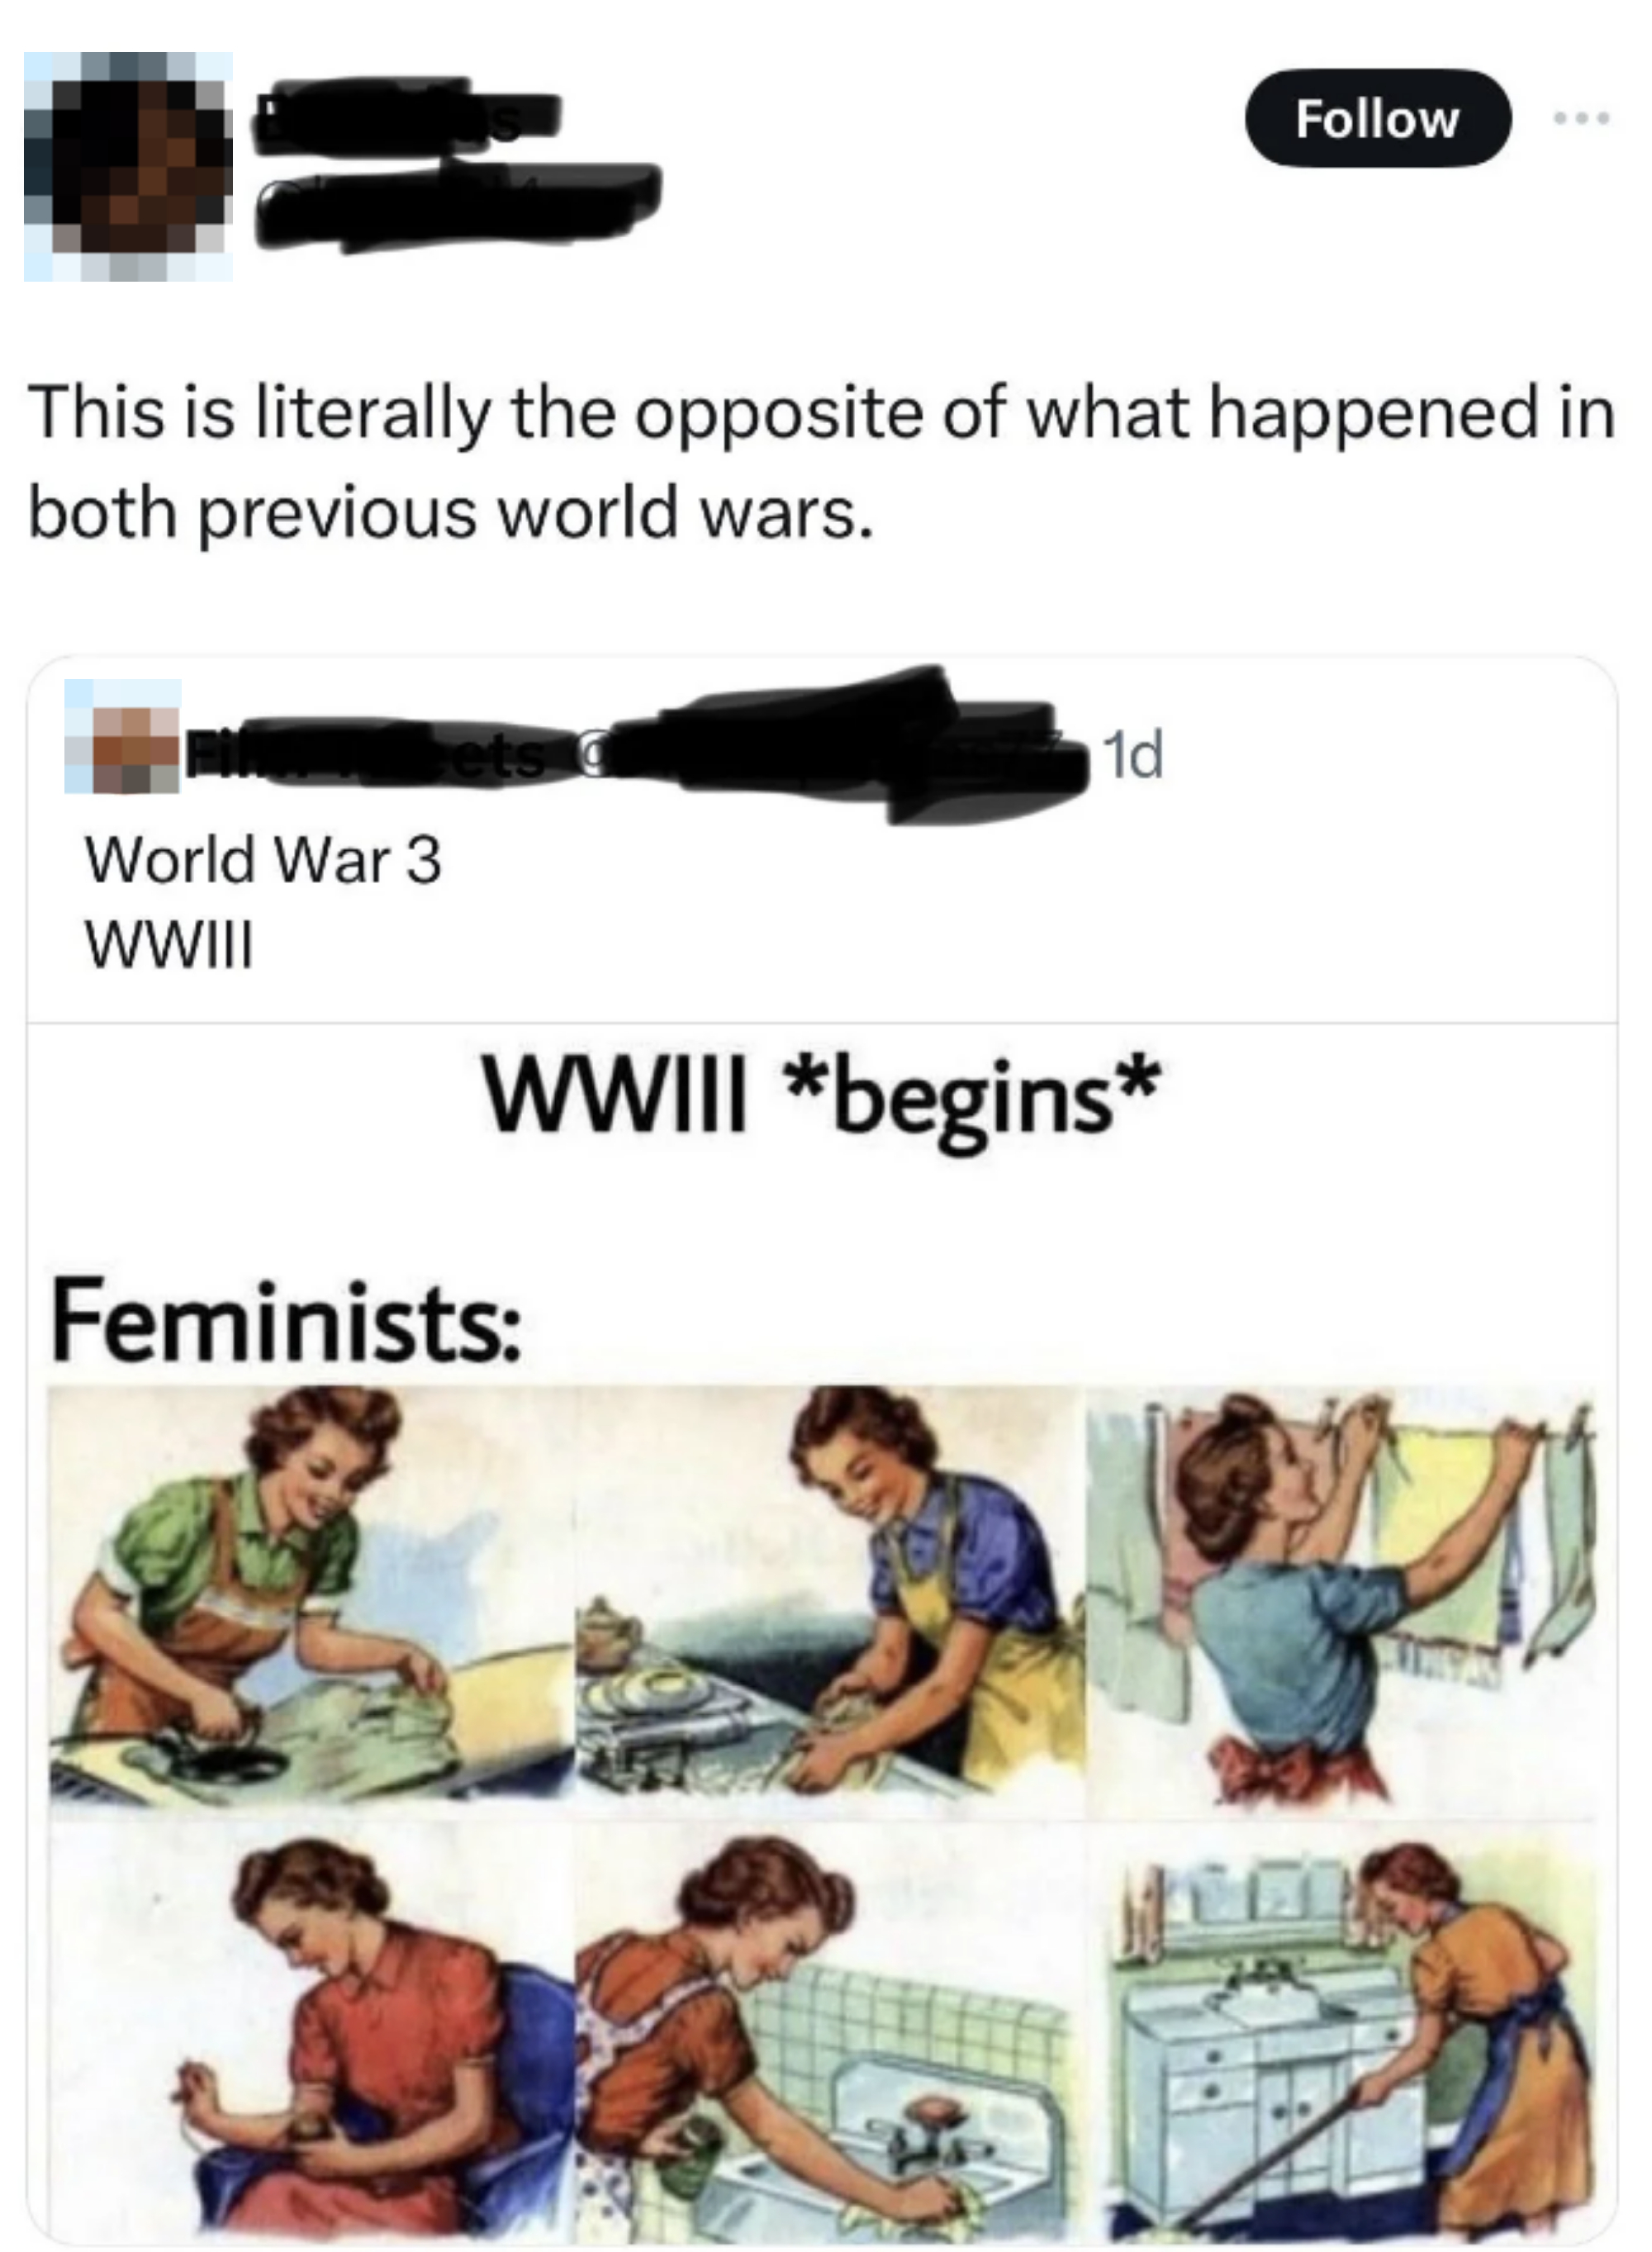 Meme implying feminists would revert to traditional roles if WWIII begins, showing vintage-style drawings of women doing chores